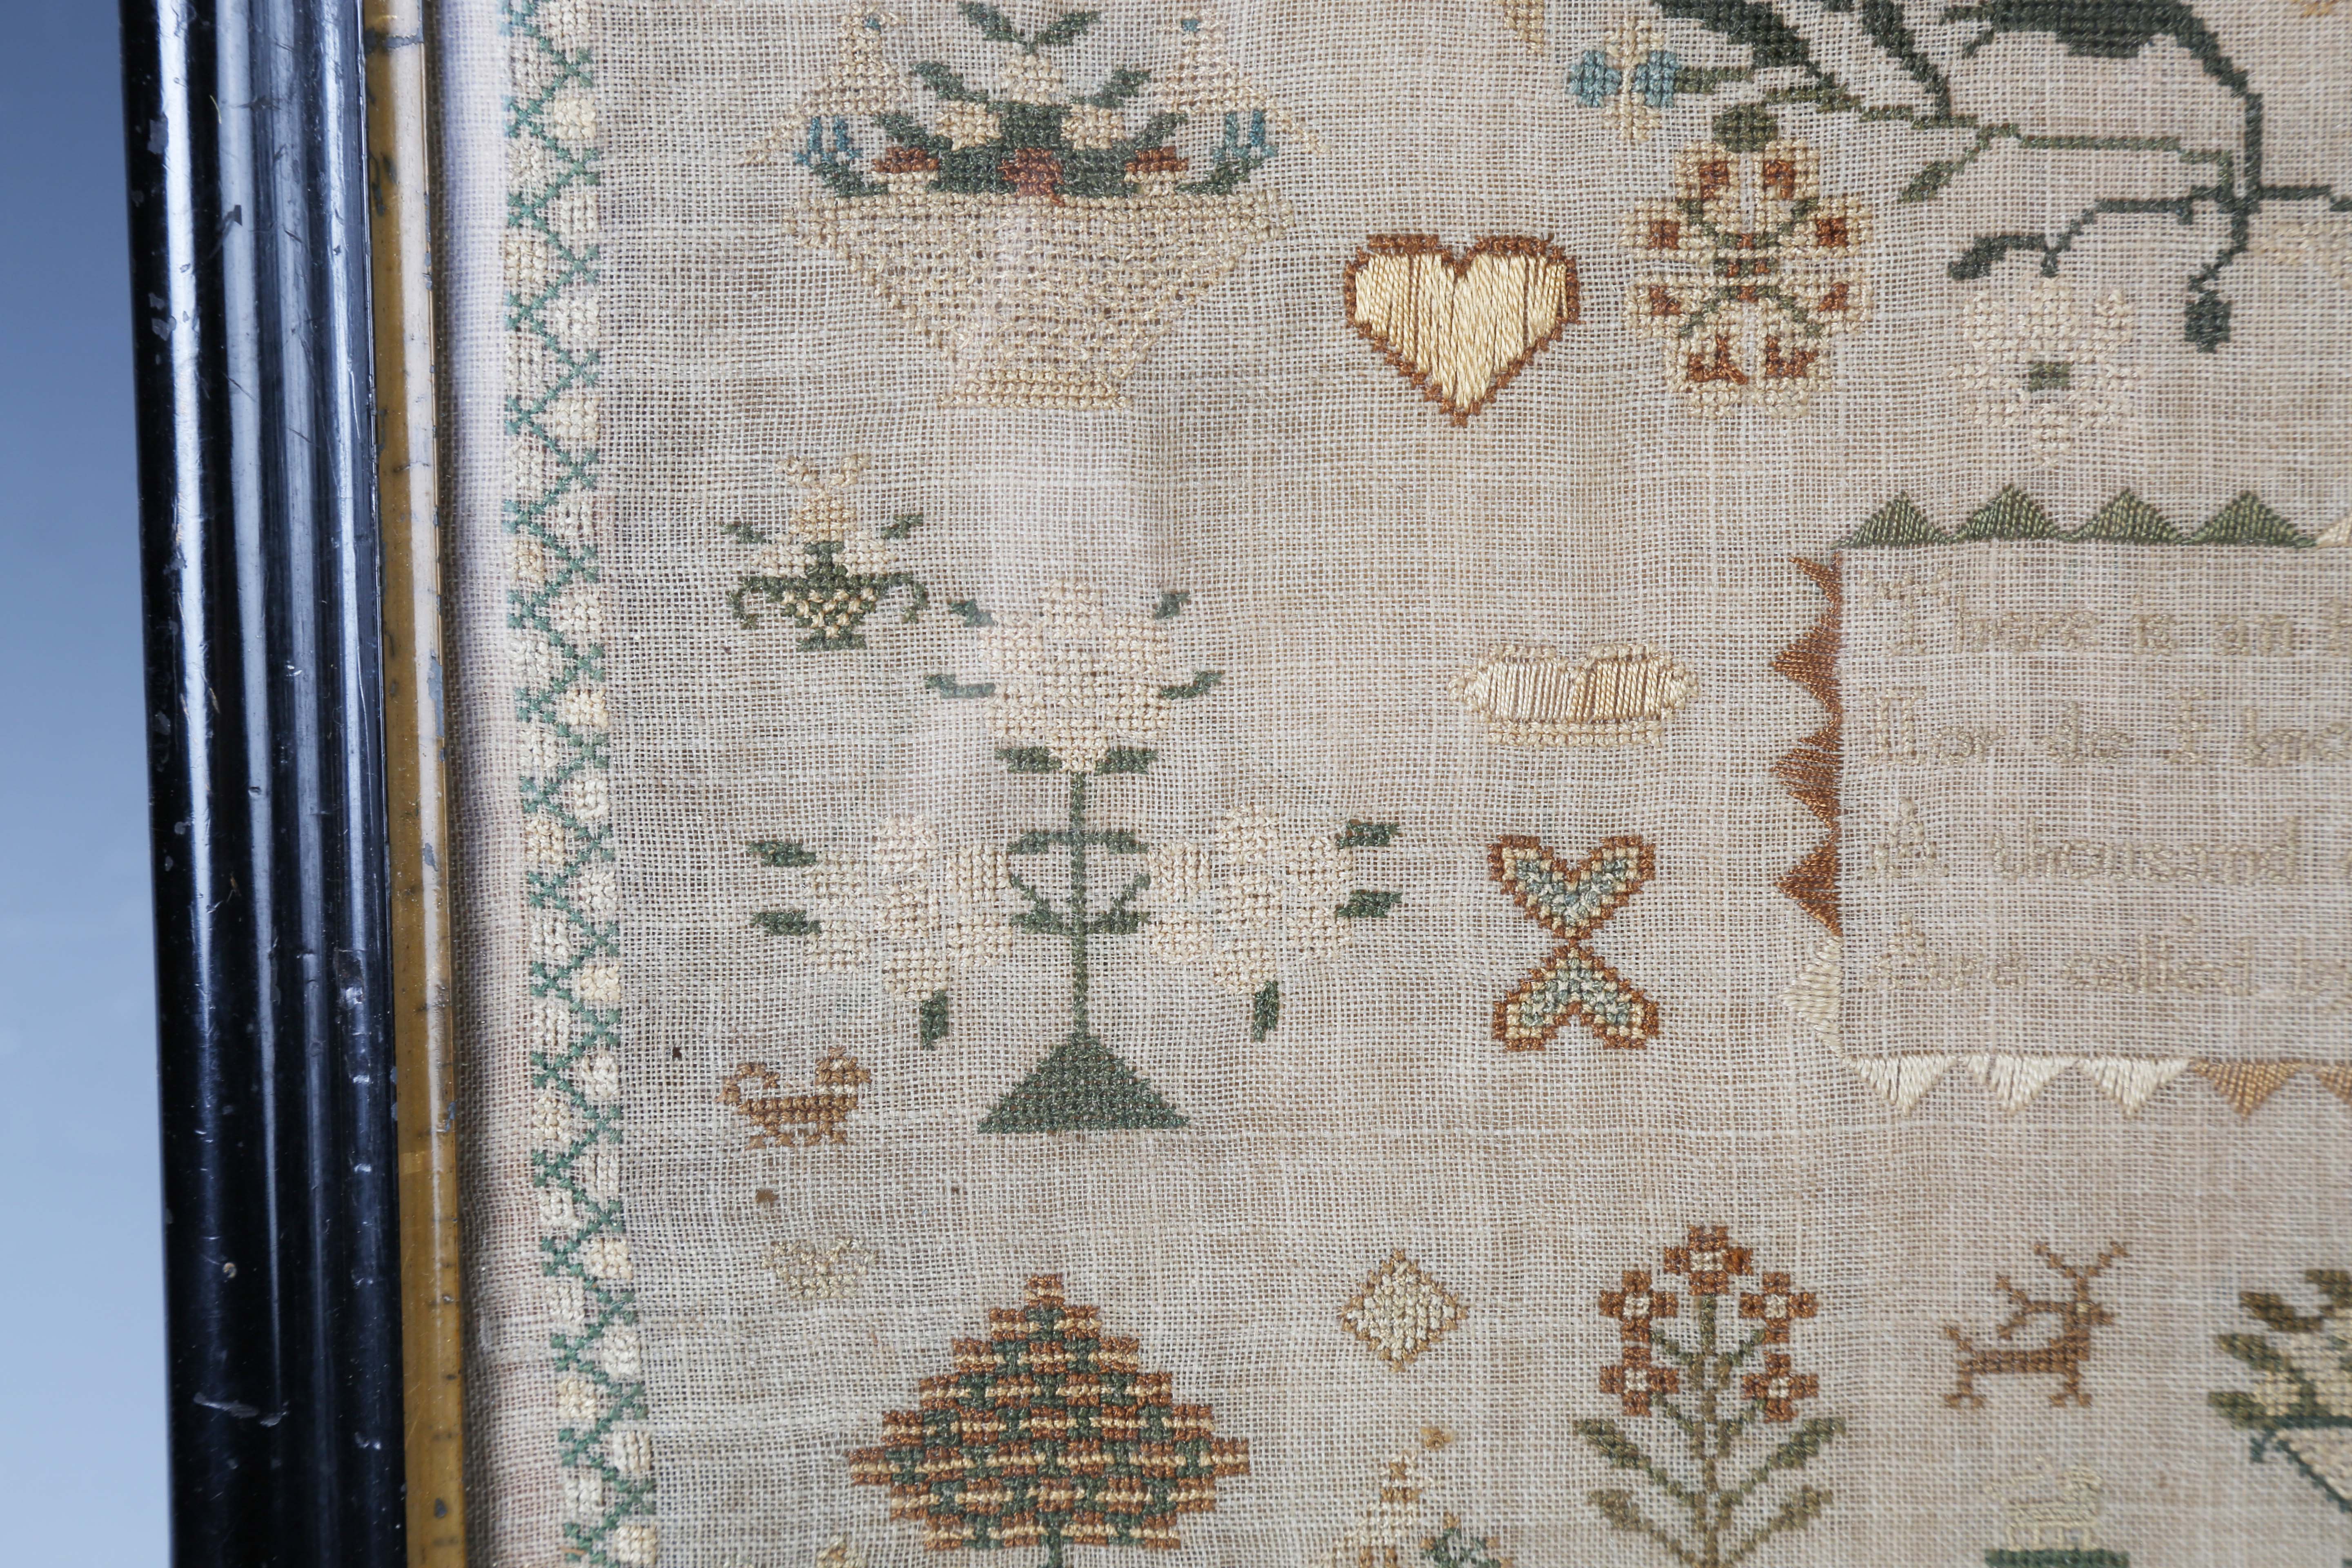 An early Victorian needlework sampler by Jane Constance, aged 13, dated 'January 6 1839', finely - Image 11 of 14